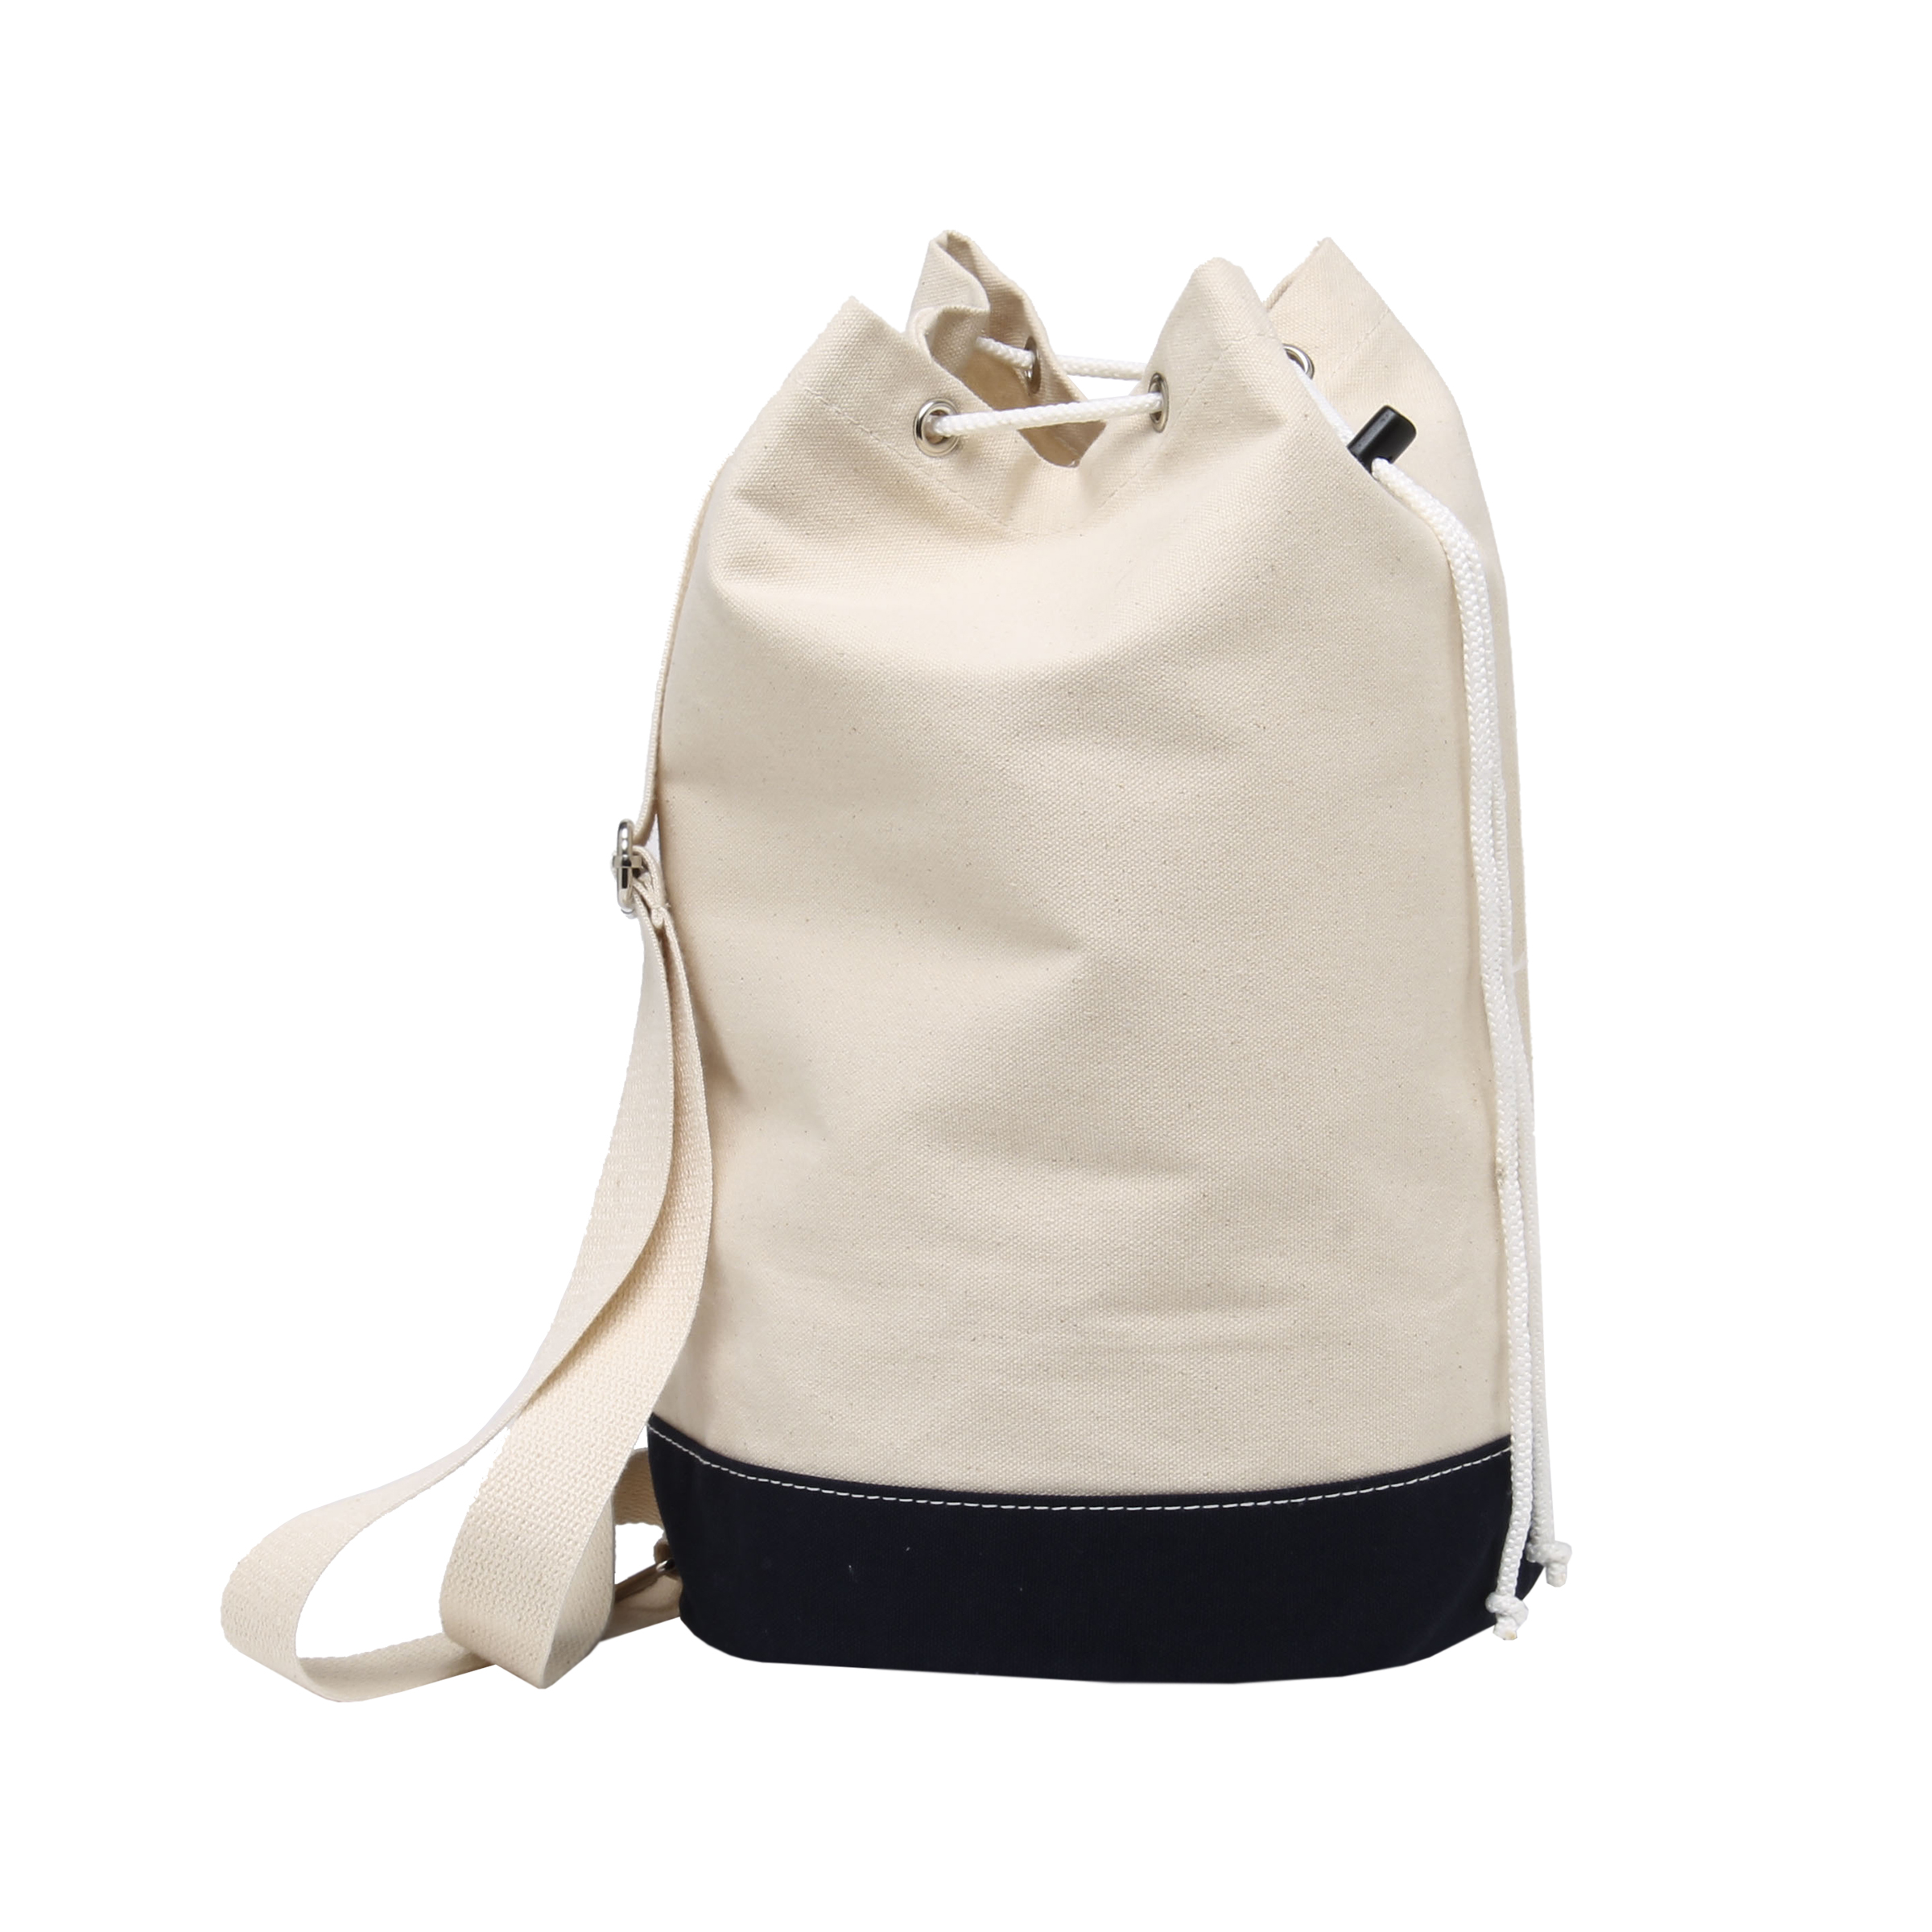 Standing Duffle Backpack - Stitchman